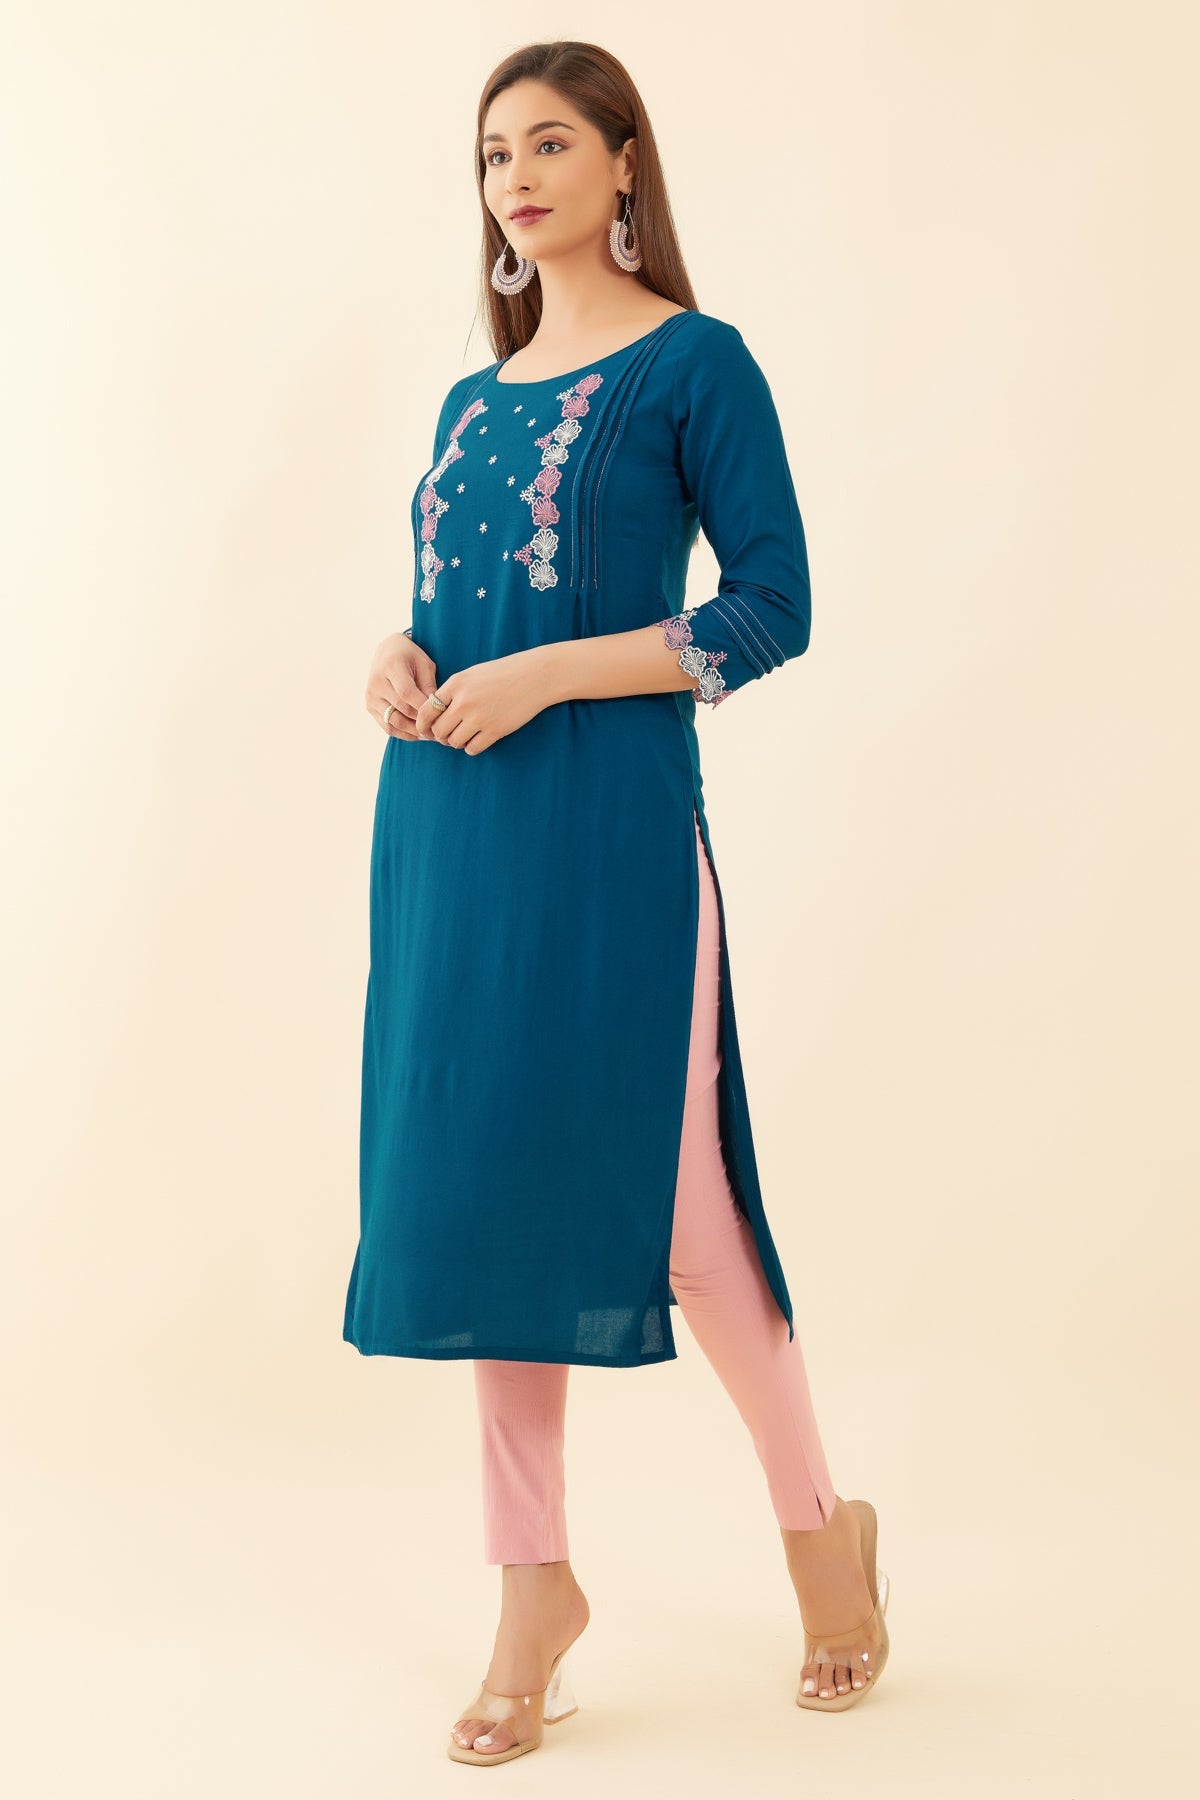 Floral Embroidered With Pin Tuck Yoke Kurta - Blue